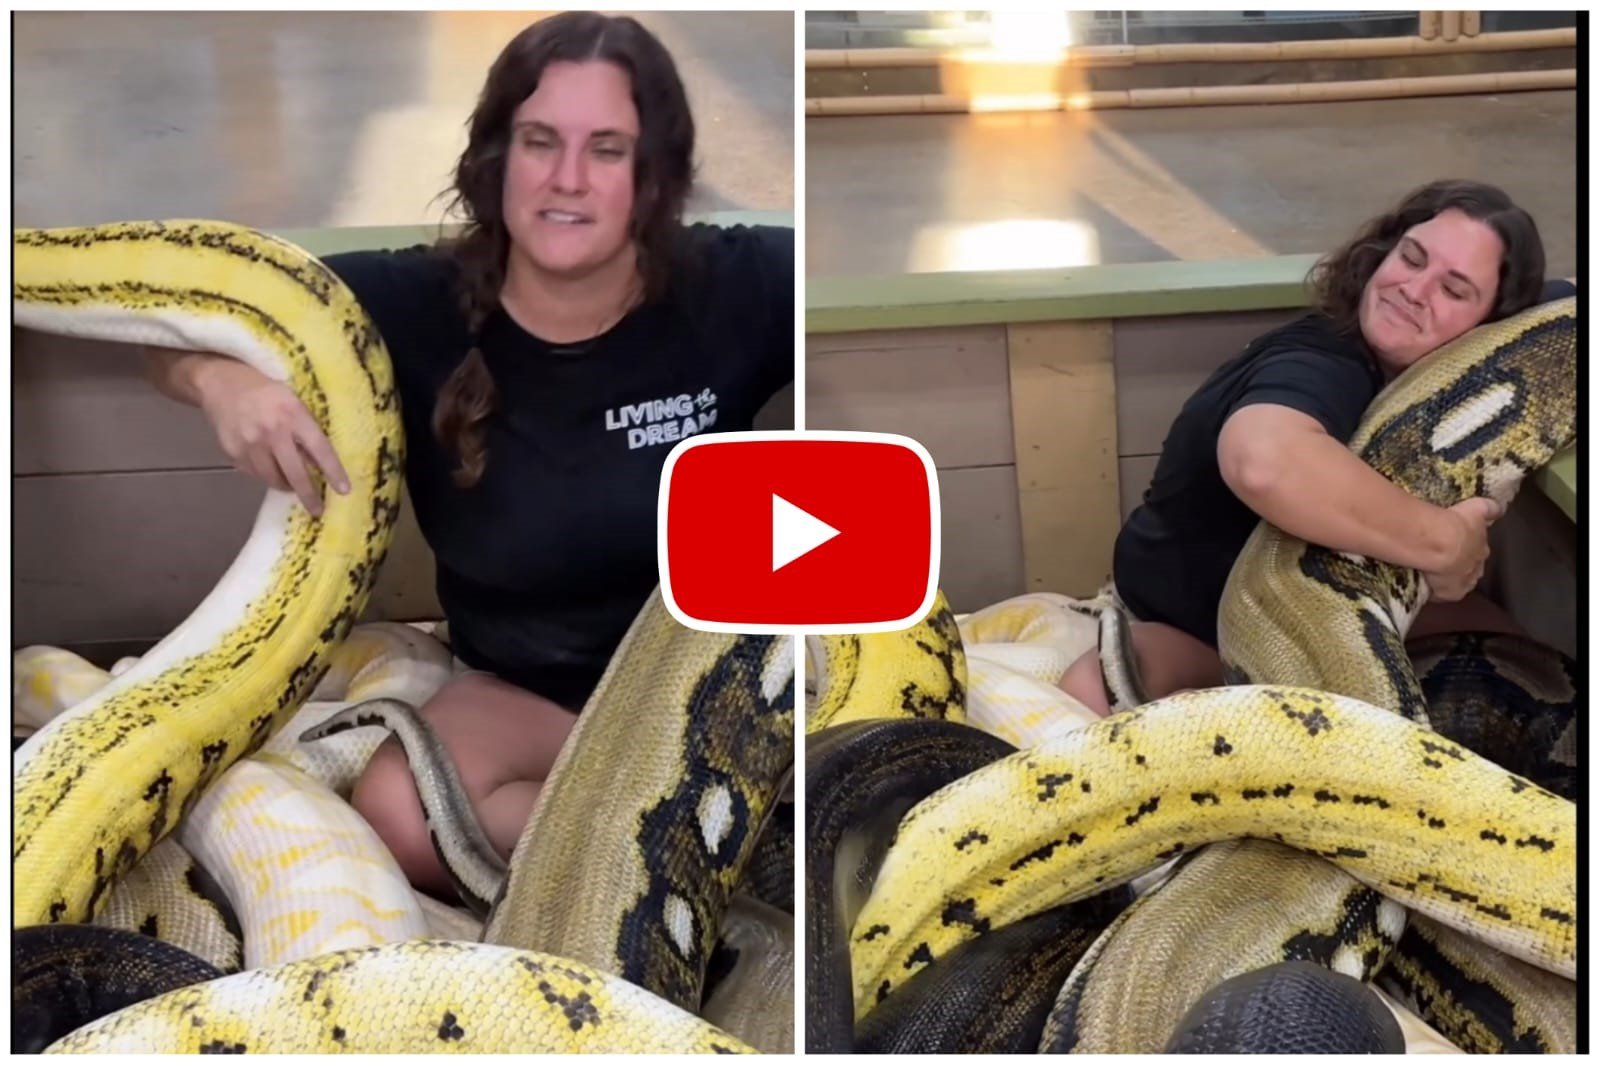 Ajgar Ka Video - Girl sitting with giant pythons in her lap